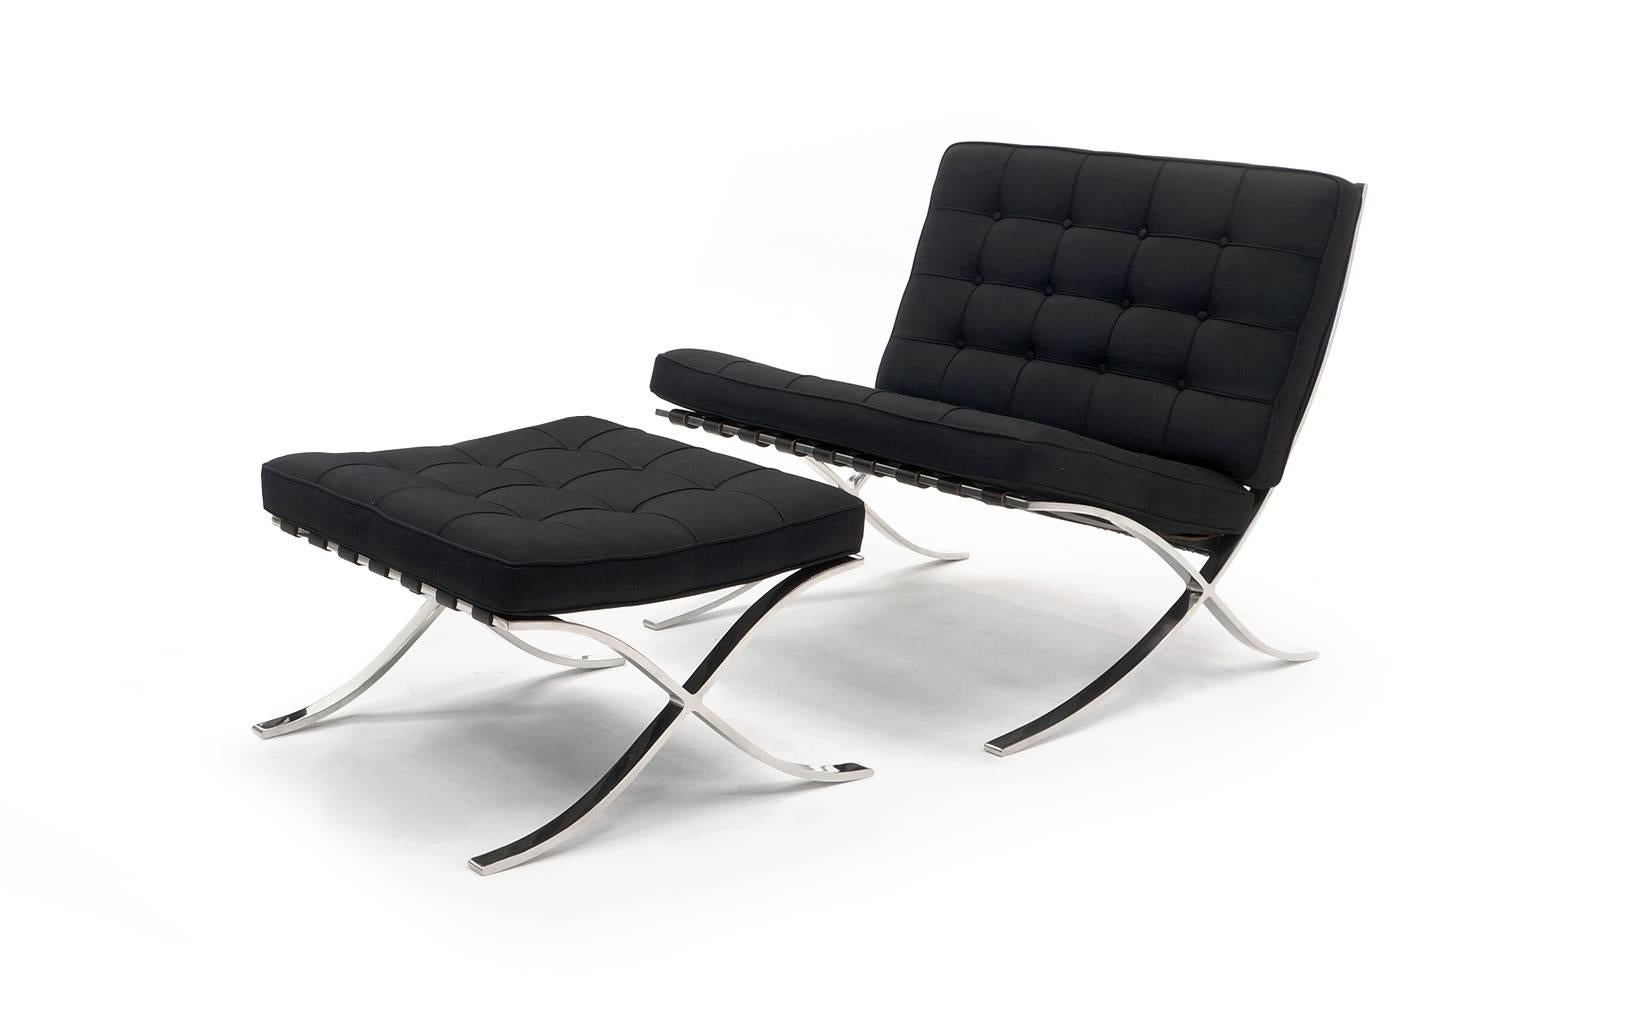 Ludwig Mies van der Rohe for Knoll Barcelona chair with ottoman in hand polished stainless steel. Created by Ludwig Mies van der Rohe for the German Pavilion at the 1929 Barcelona exposition. This is an original Knoll stainless steel frame with new